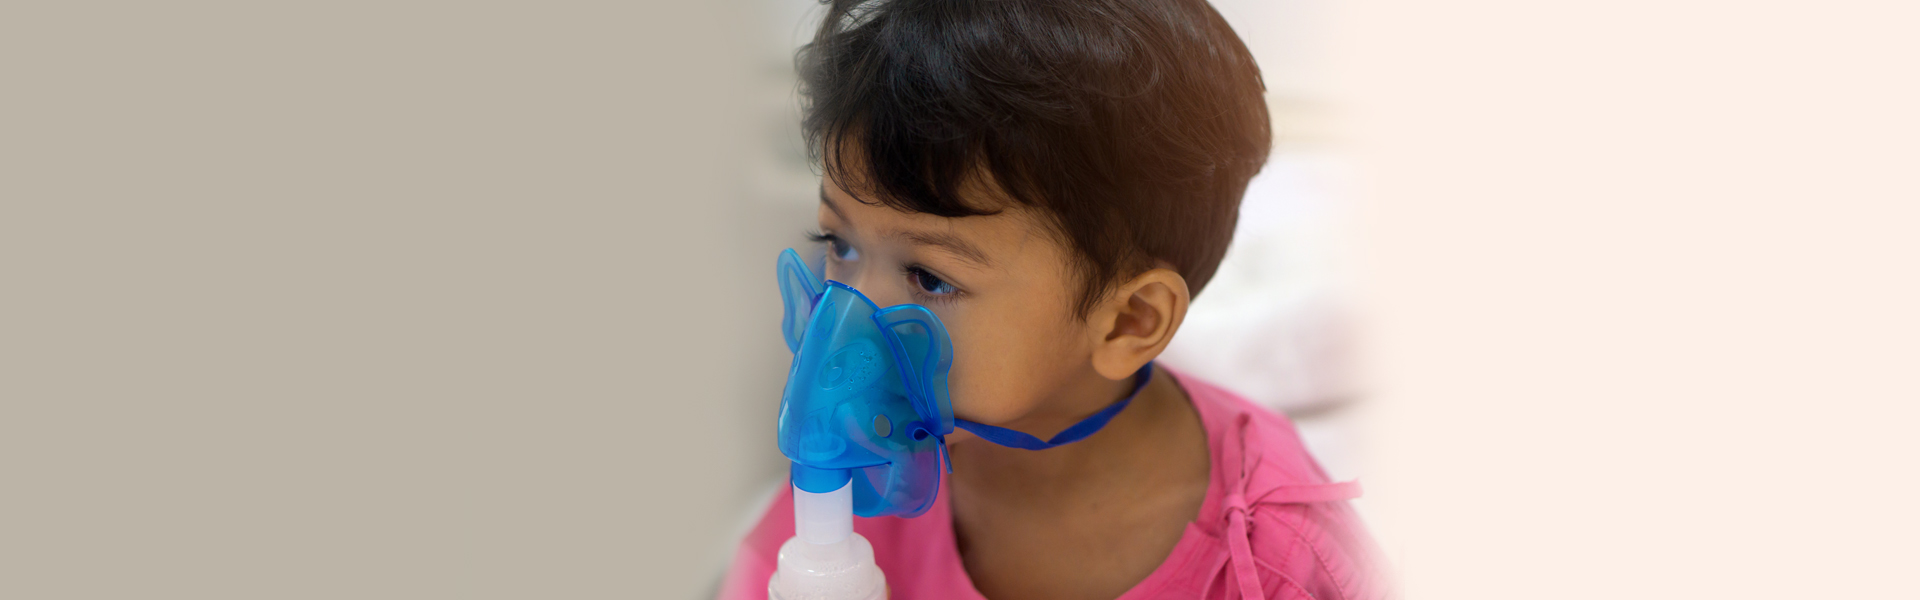 RSV and PNEUMONIA — Know When to Go to the ER